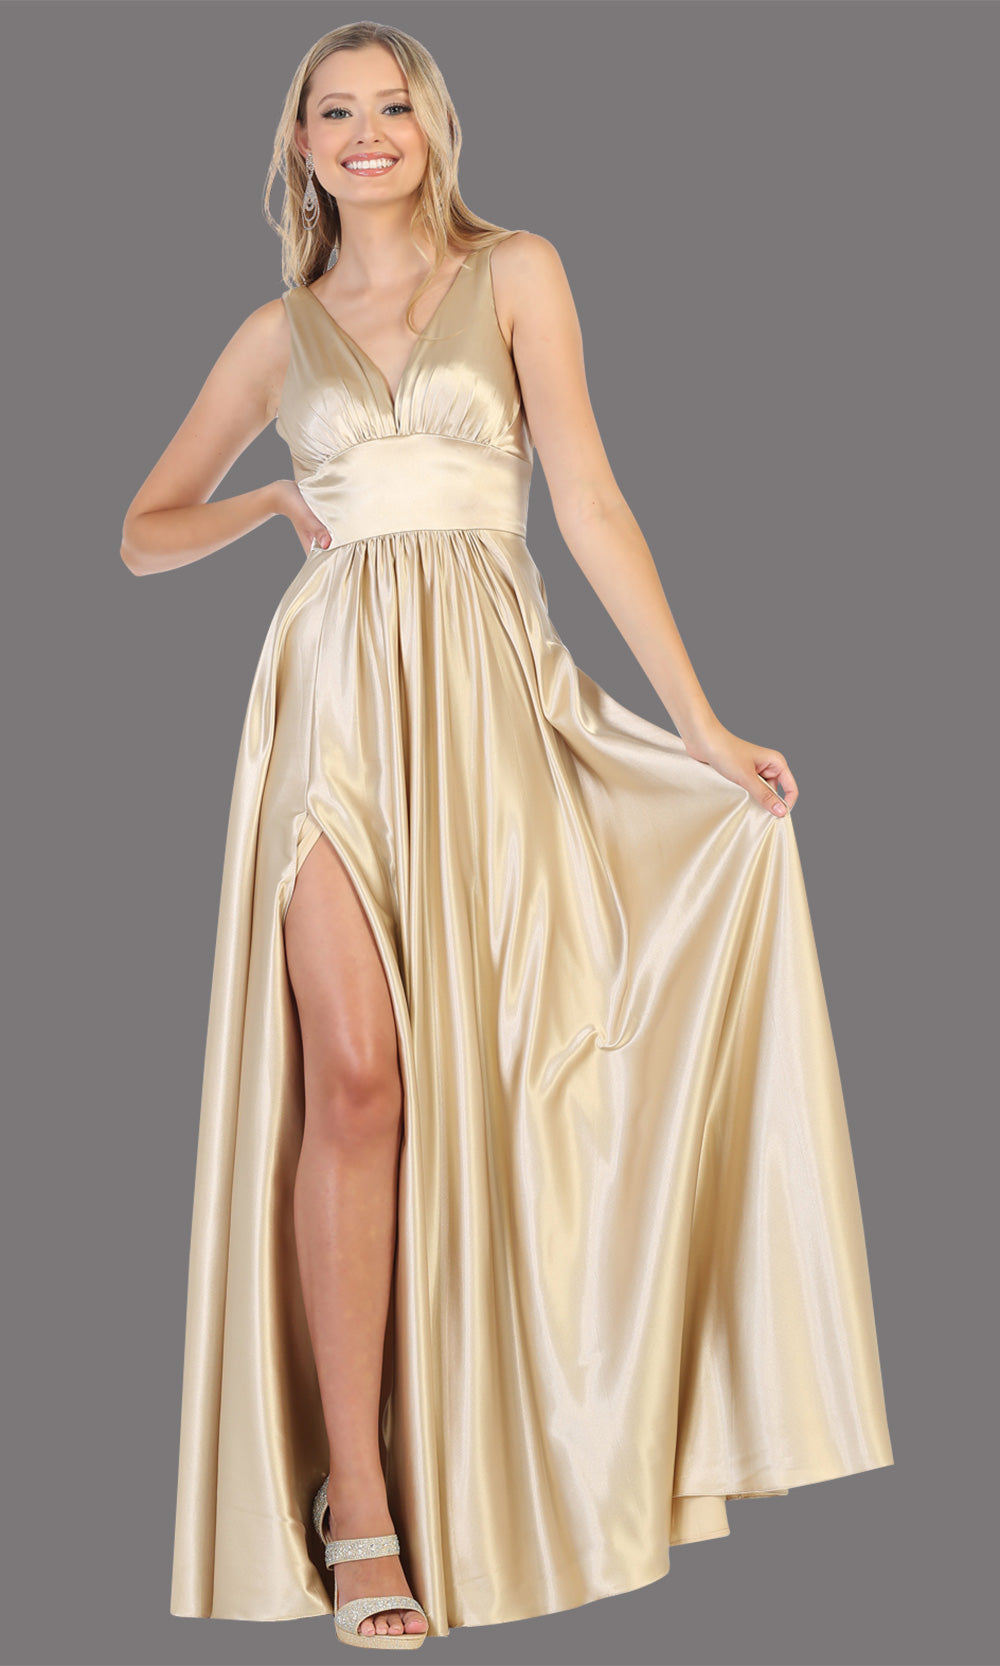 Mayqueen MQ1723 long champagne satin dress with v neck, wide straps, & high slit. This long light gold dress is perfect for bridesmaid dresses, summer wedding guest dress, formal evening party dress, prom dress, engagement/e-shoot dress.Plus sizes